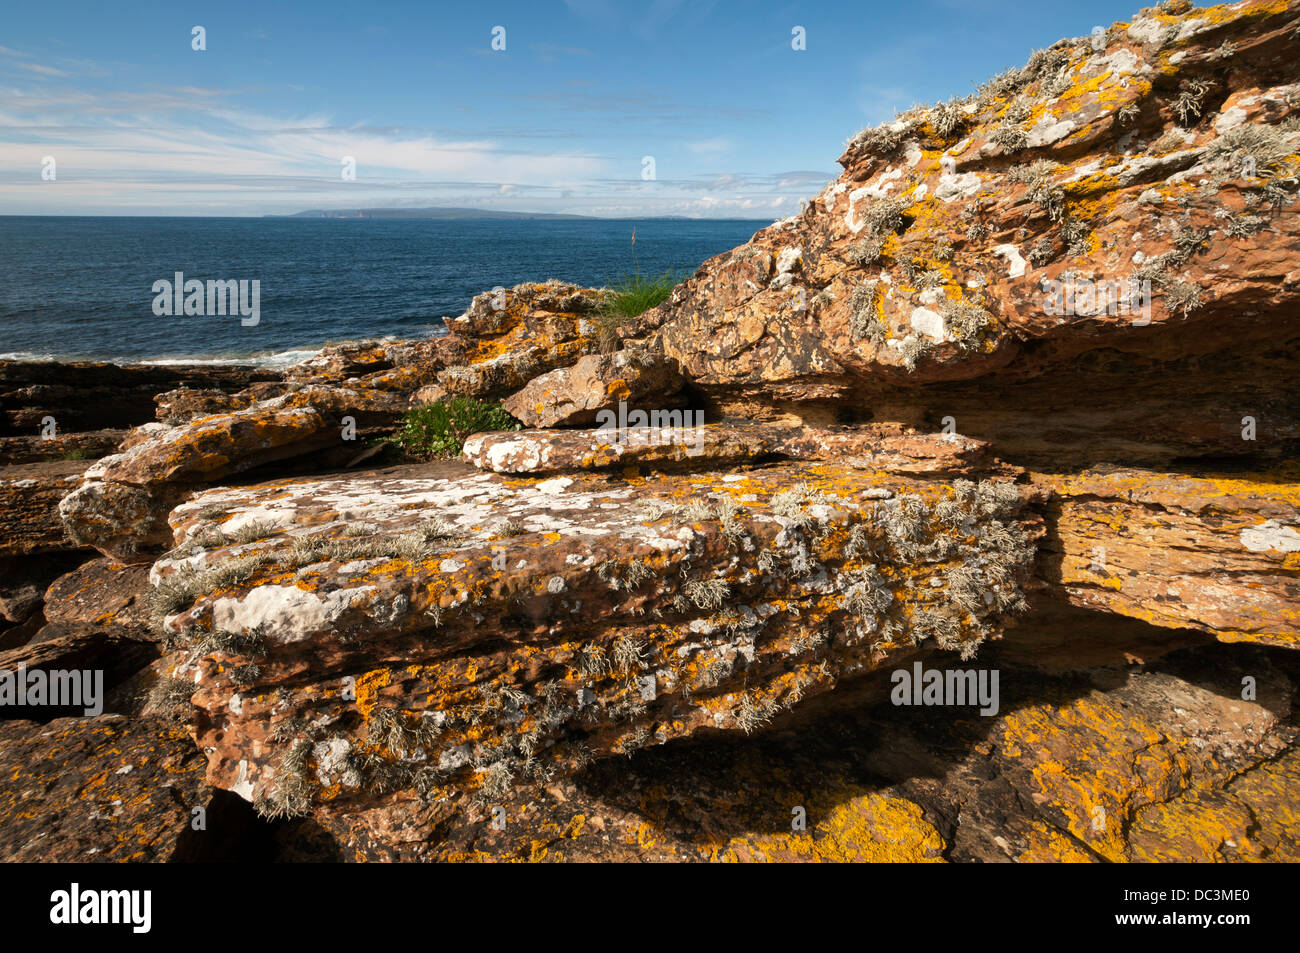 Hoy (Orkney) over the Pentland Firth from near village of Mey, Caithness, Scotland, UK.  Lichen covered rocks in the foreground. Stock Photo